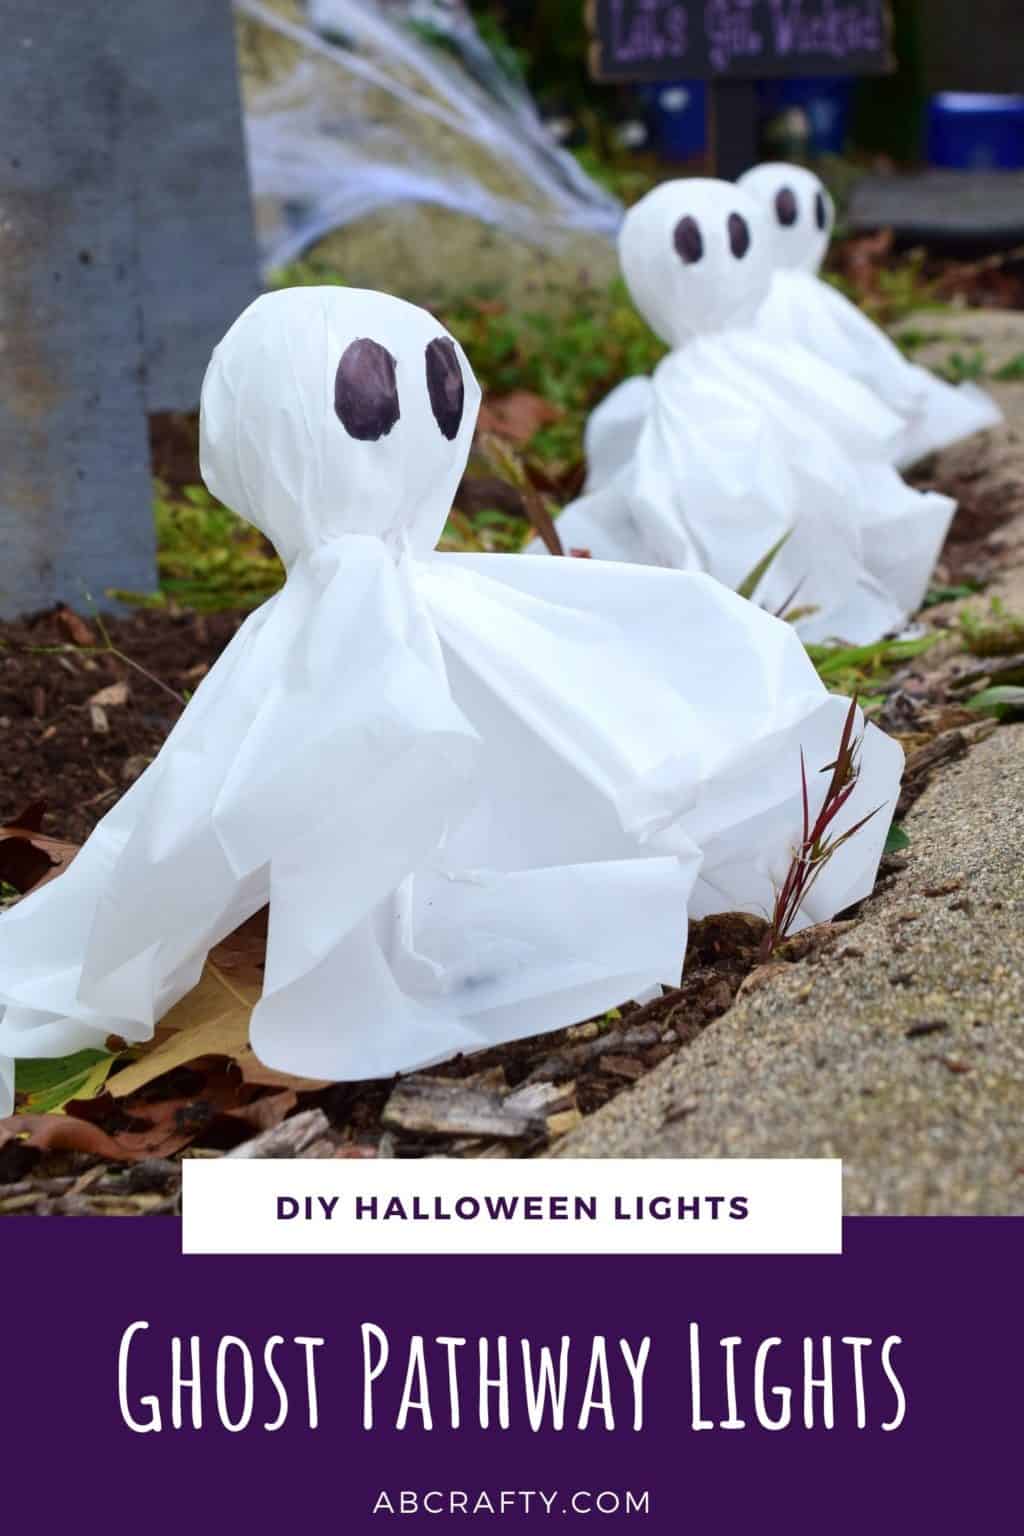 homemade ghost lights lining the path in front of a house with the title "diy halloween lights - ghost pathway lights"